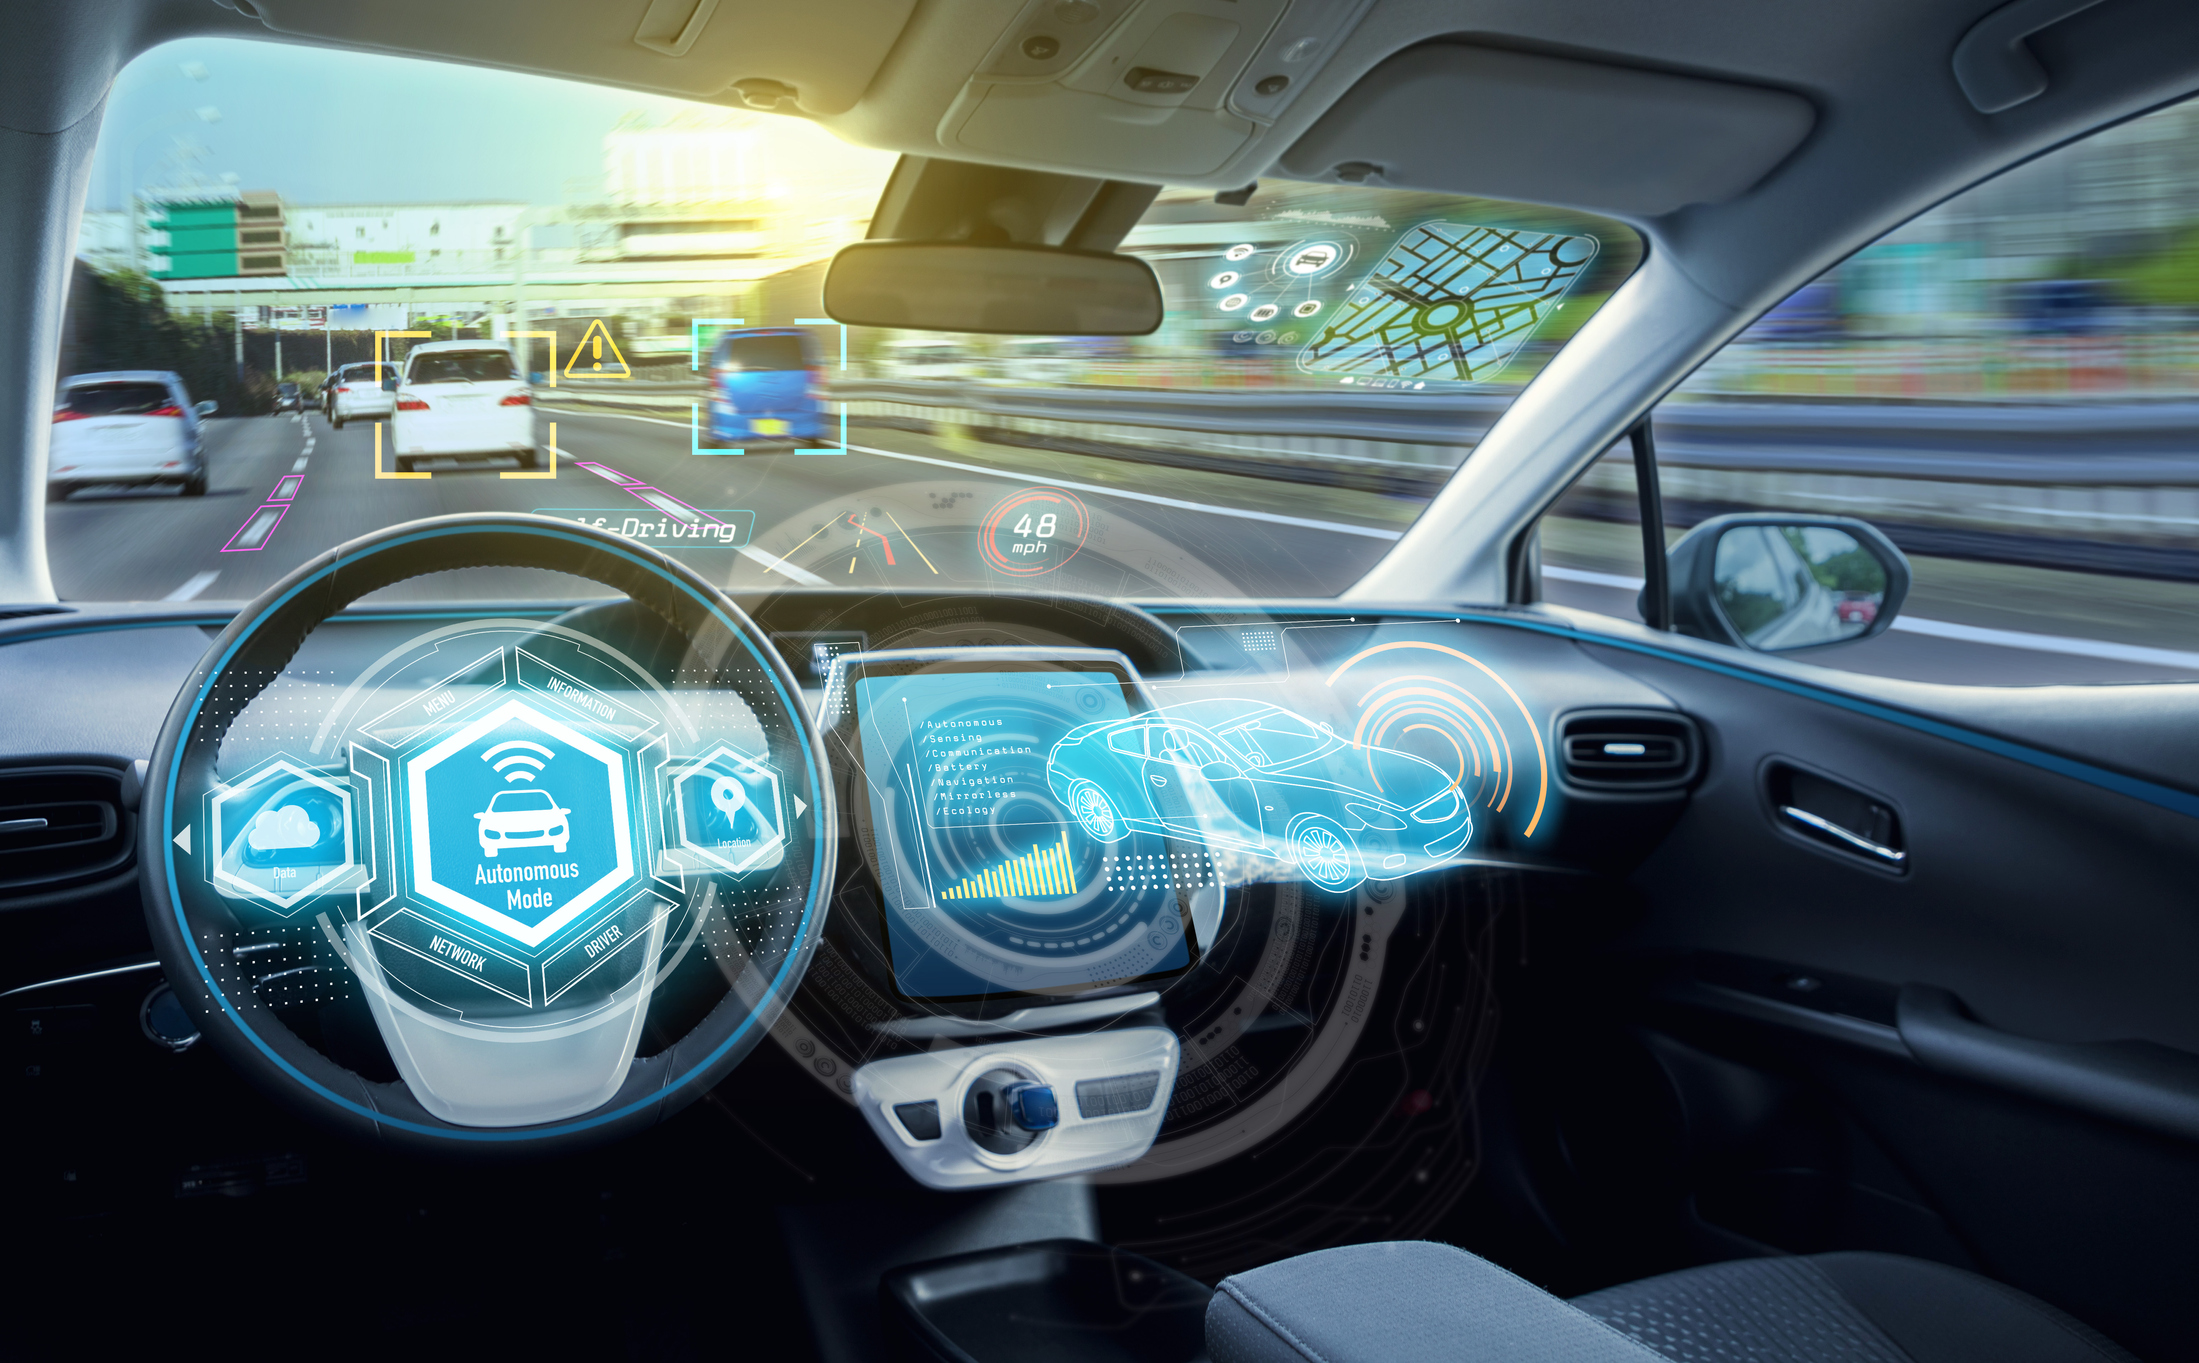 The race to simplify the digital dashboard in autonomous cars